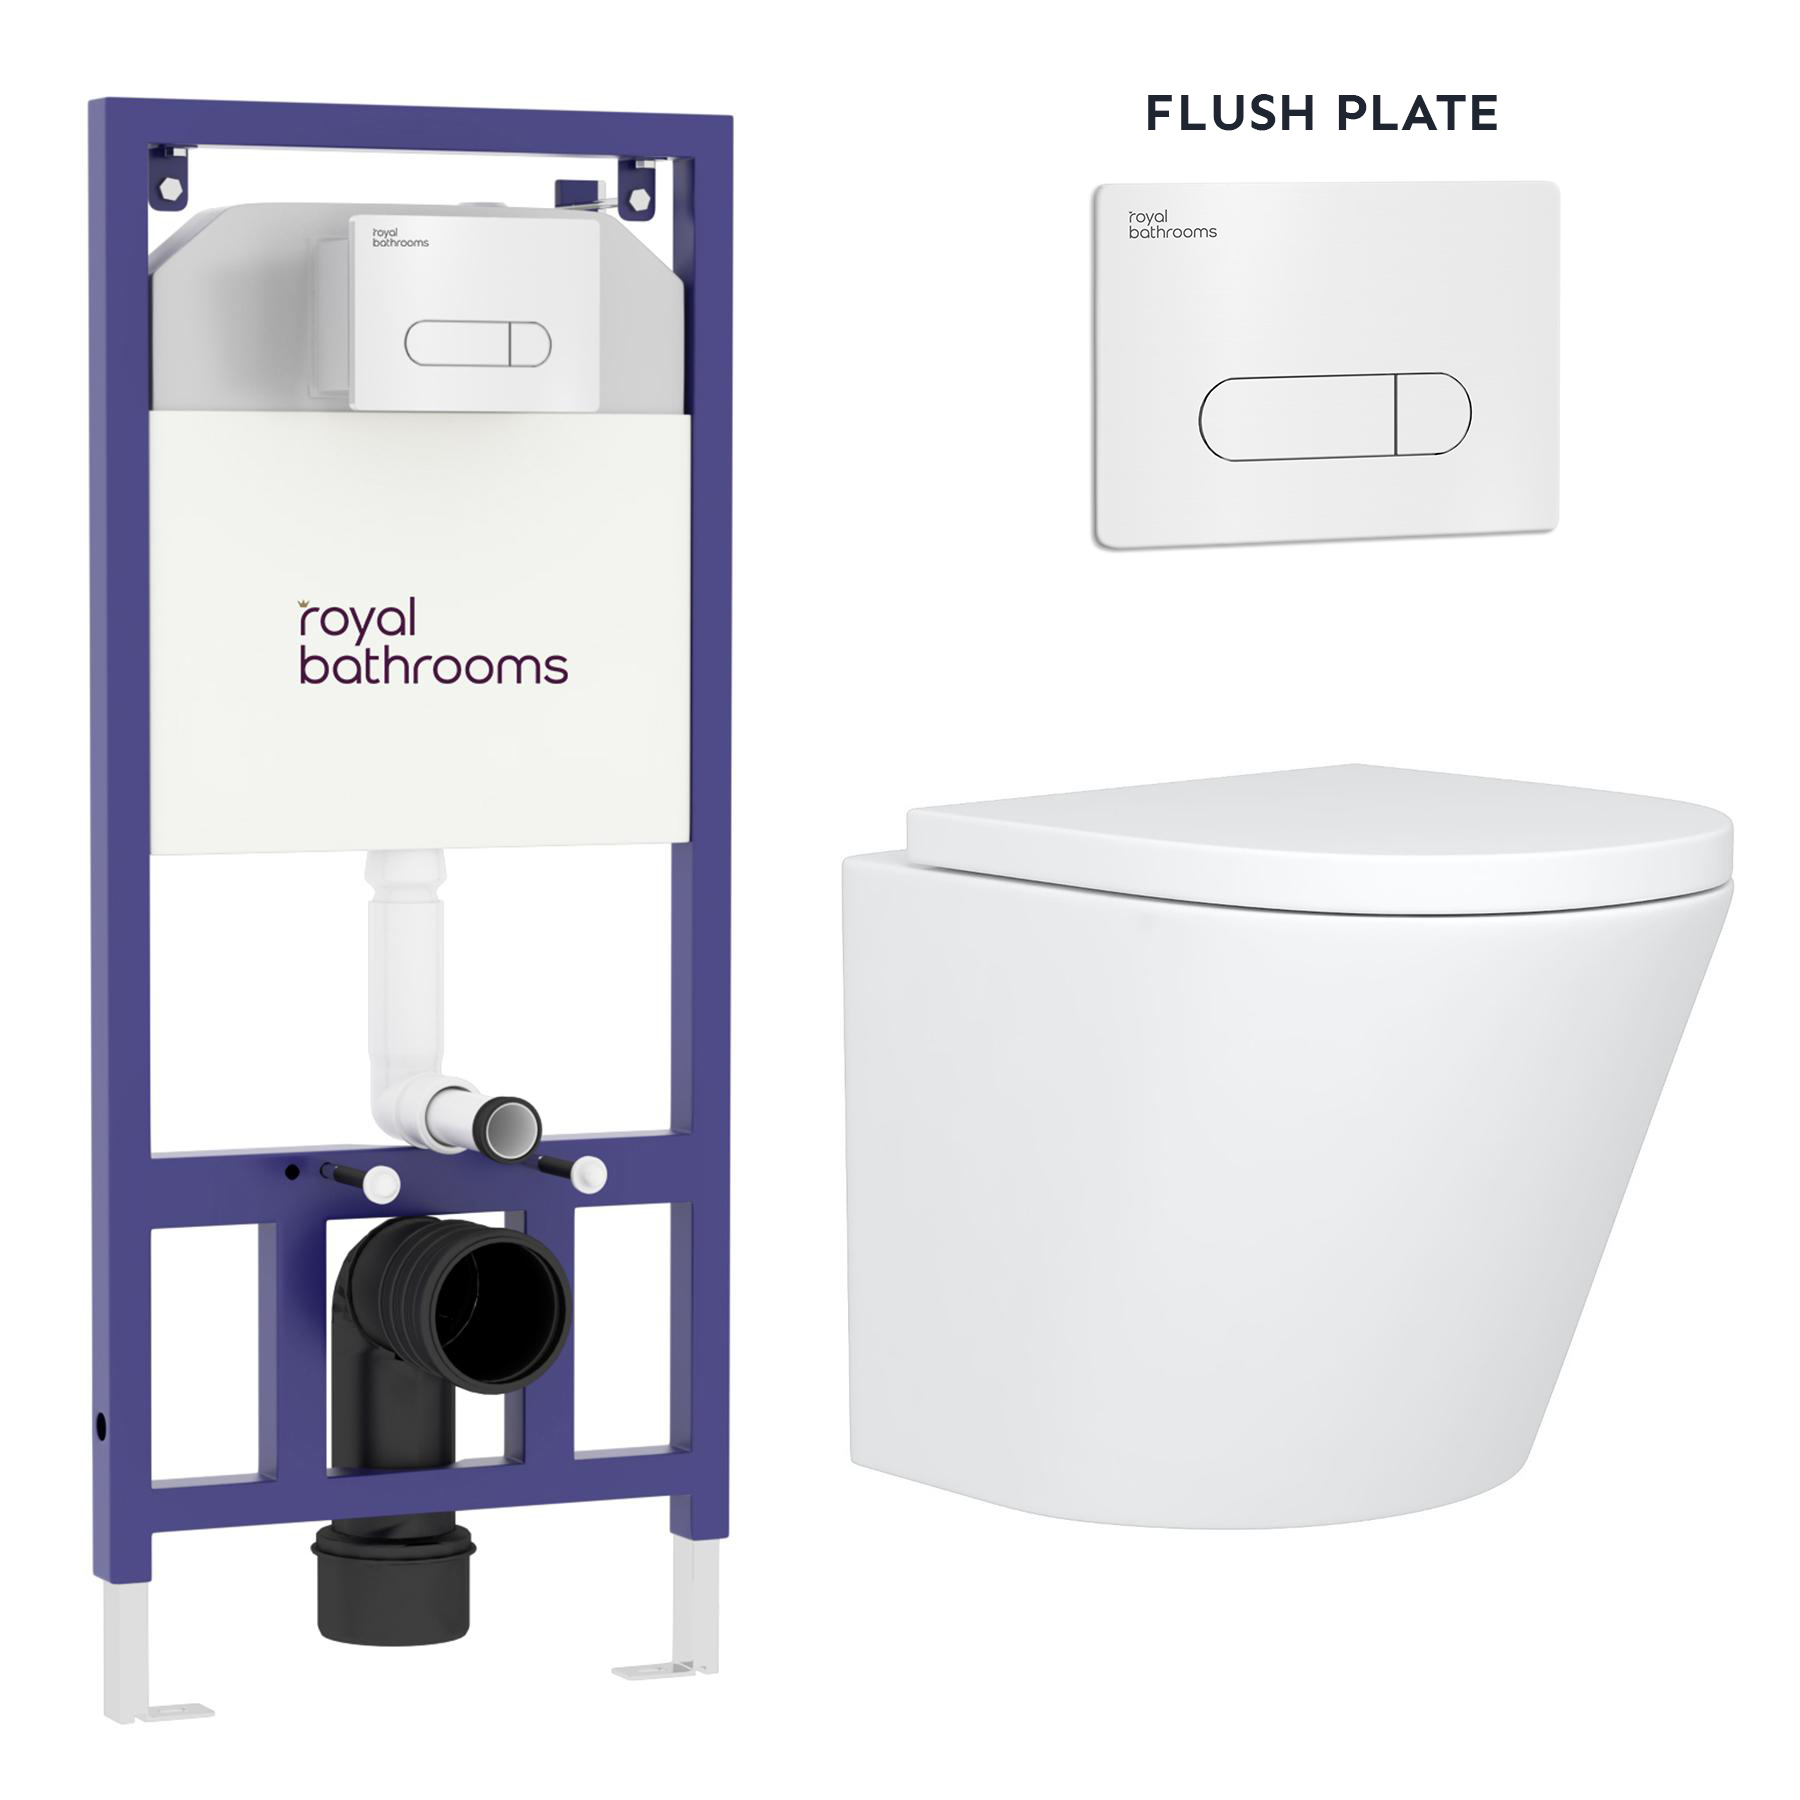 Cesar Wall Hung Rimless Toilet with Soft Close Seat With Aqua Wall Hung Frame